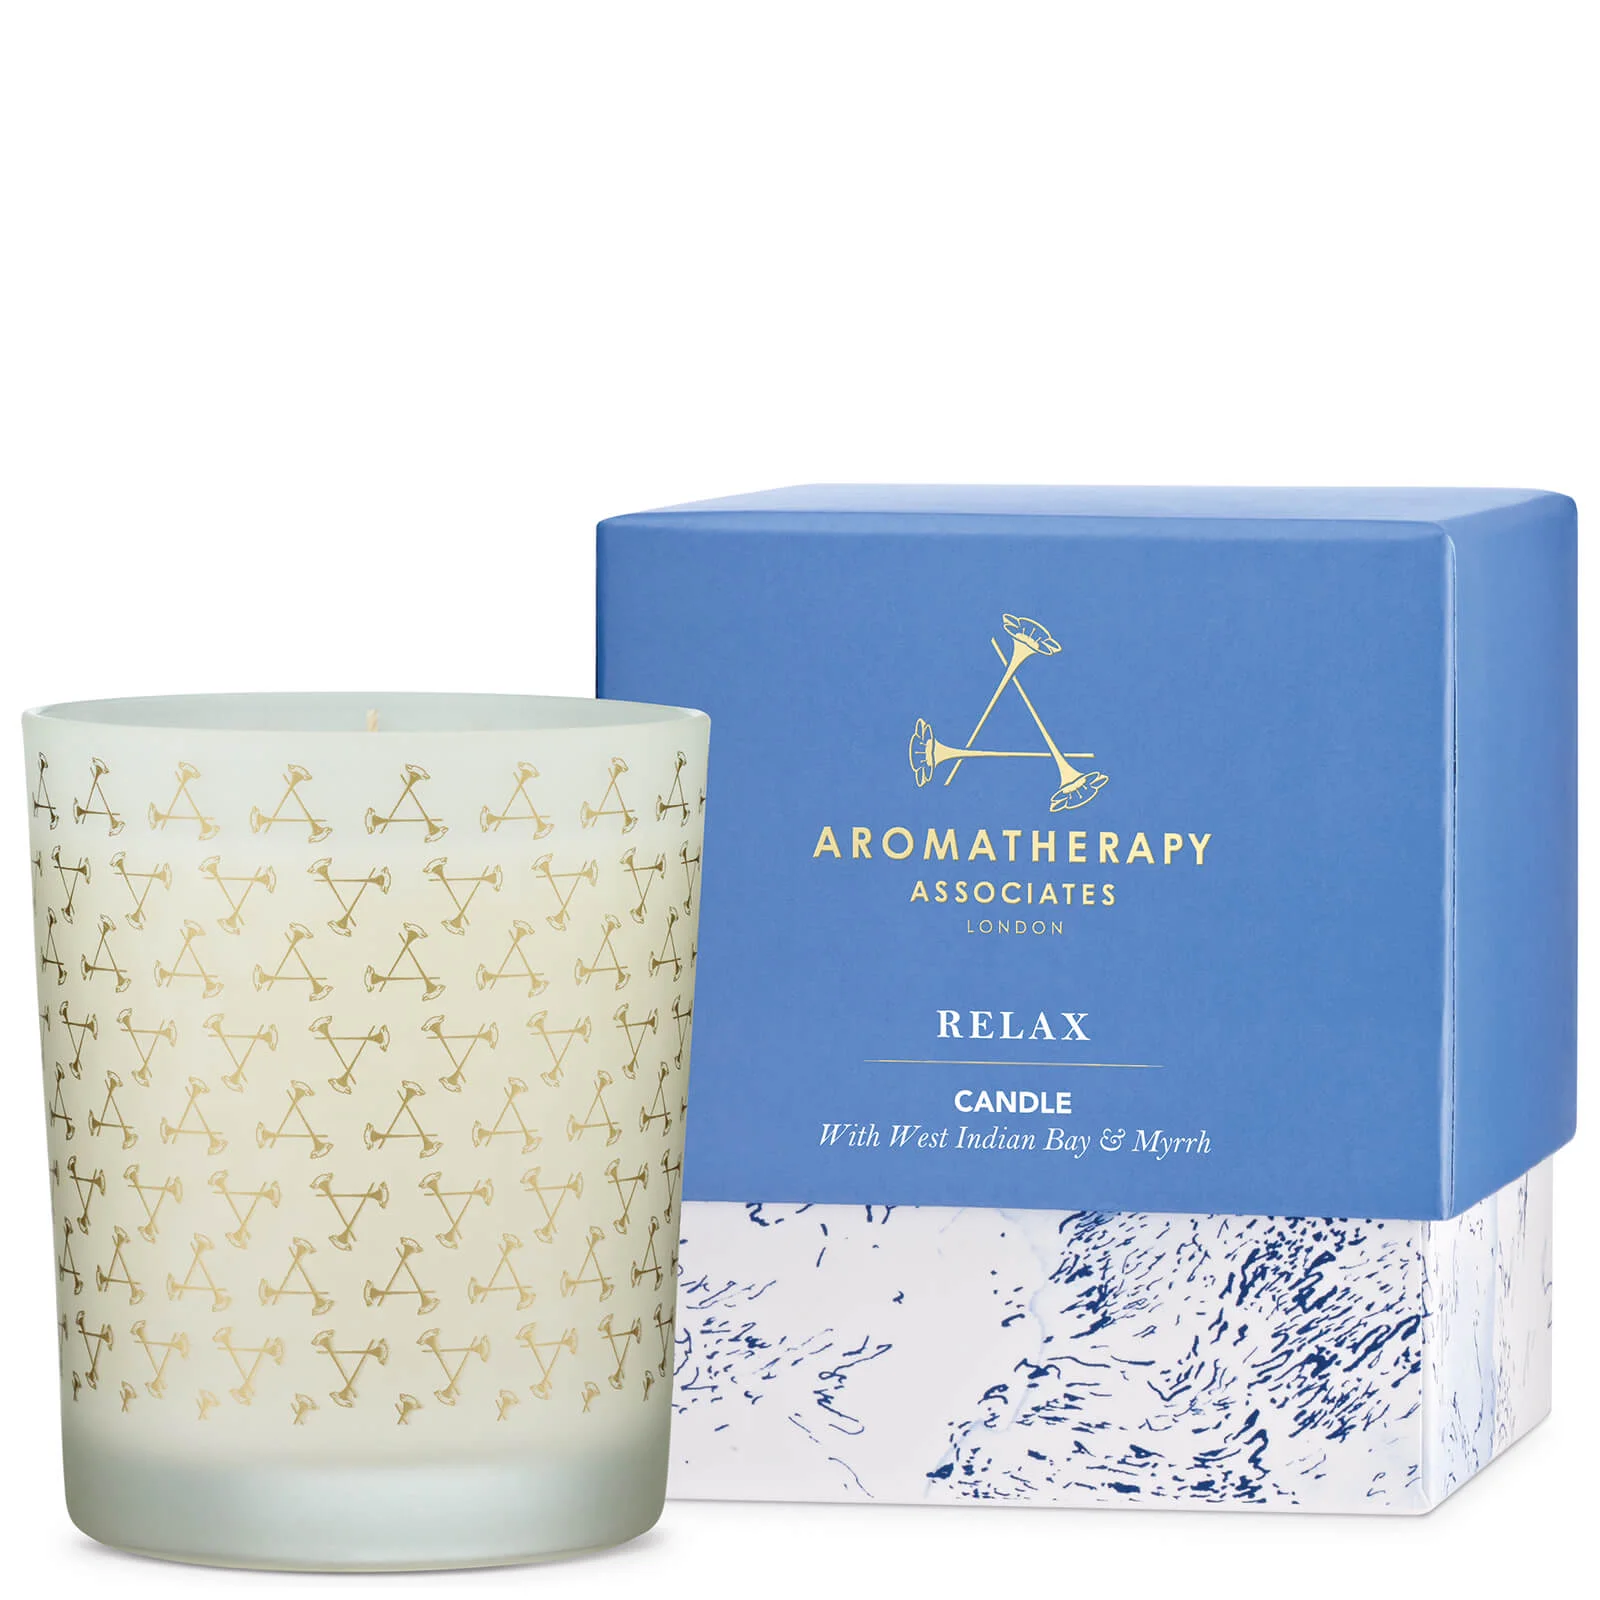 Aromatherapy Associates Relax Candle 200g Image 1